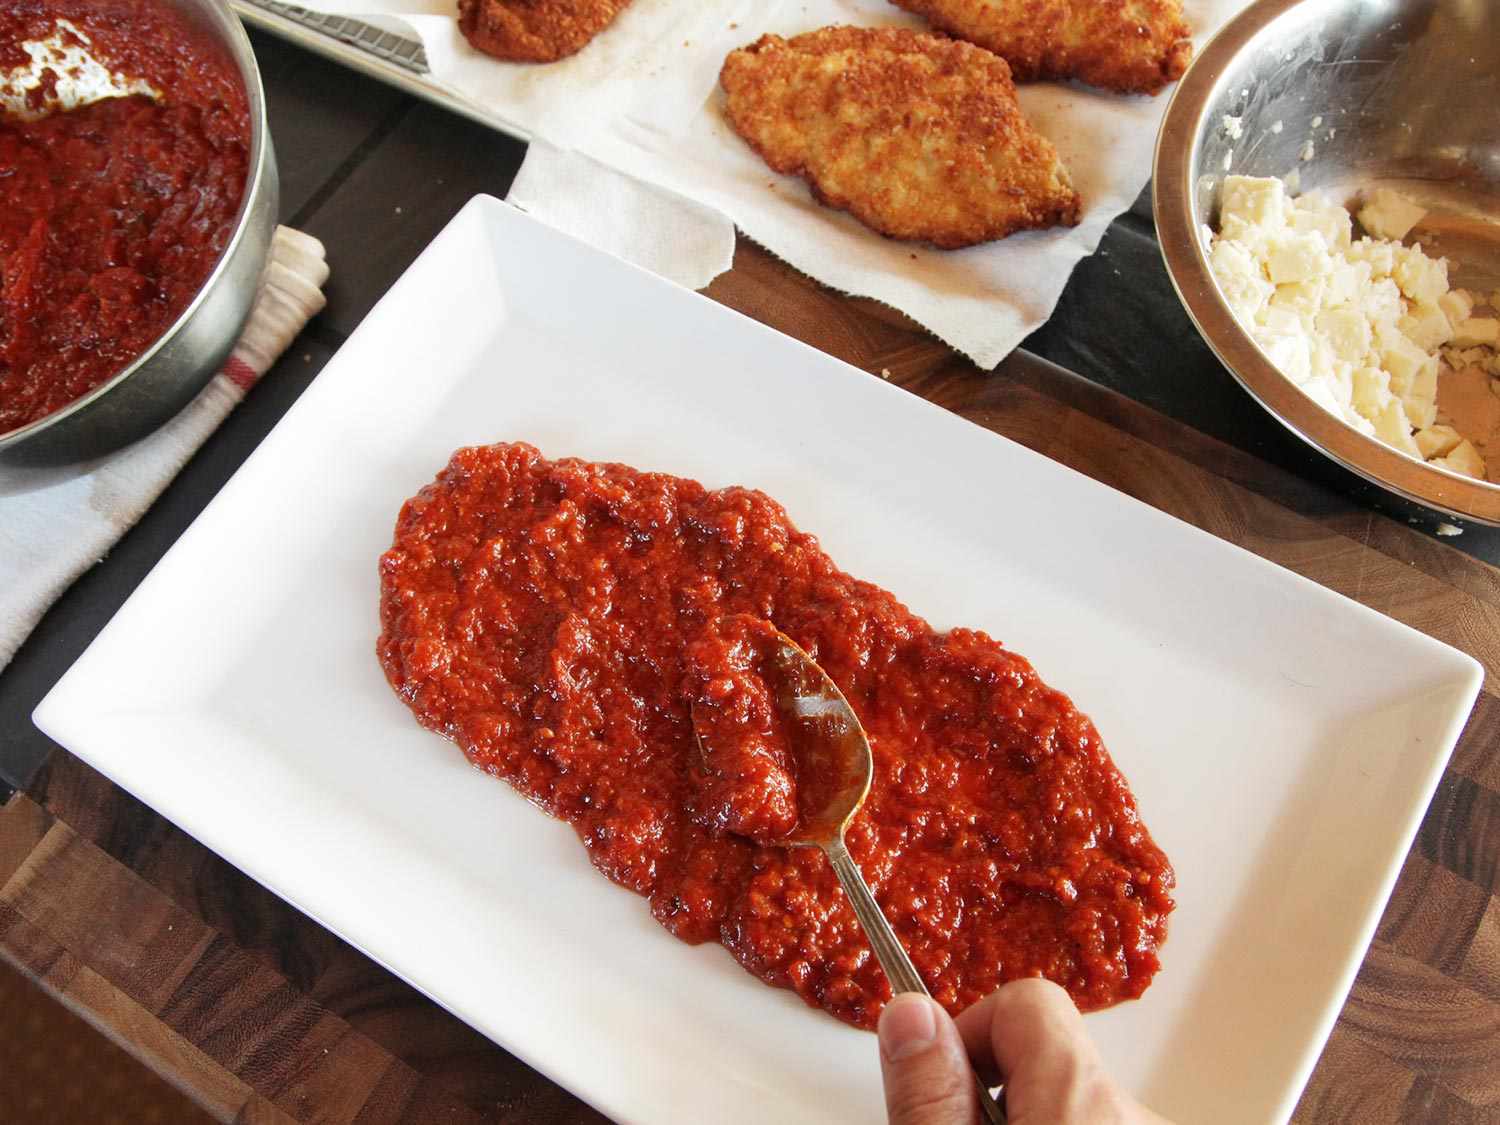 Laying down red sauce to build chicken parmesan